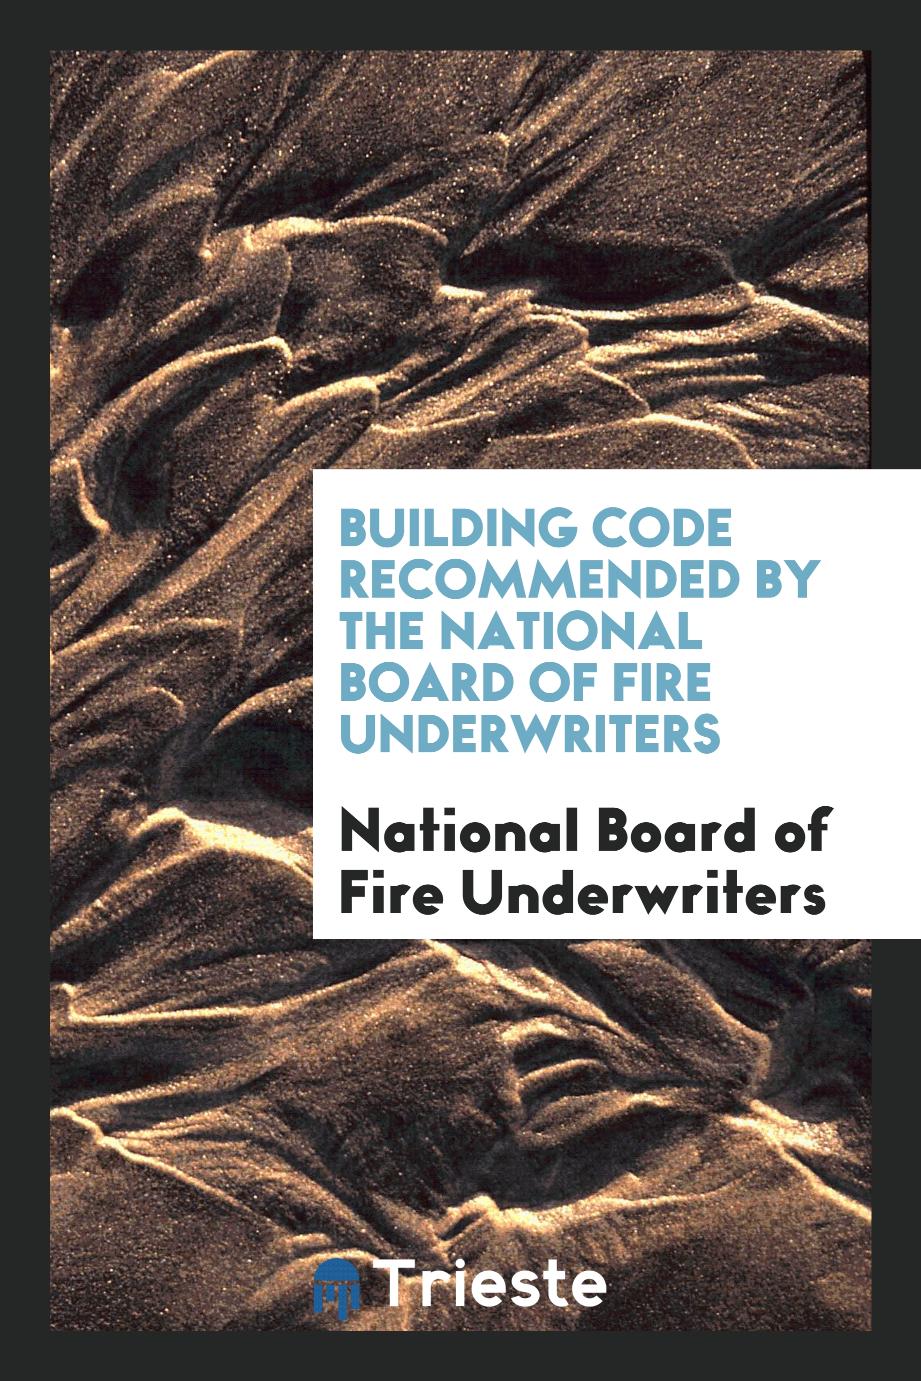 Building Code Recommended by the National Board of Fire Underwriters